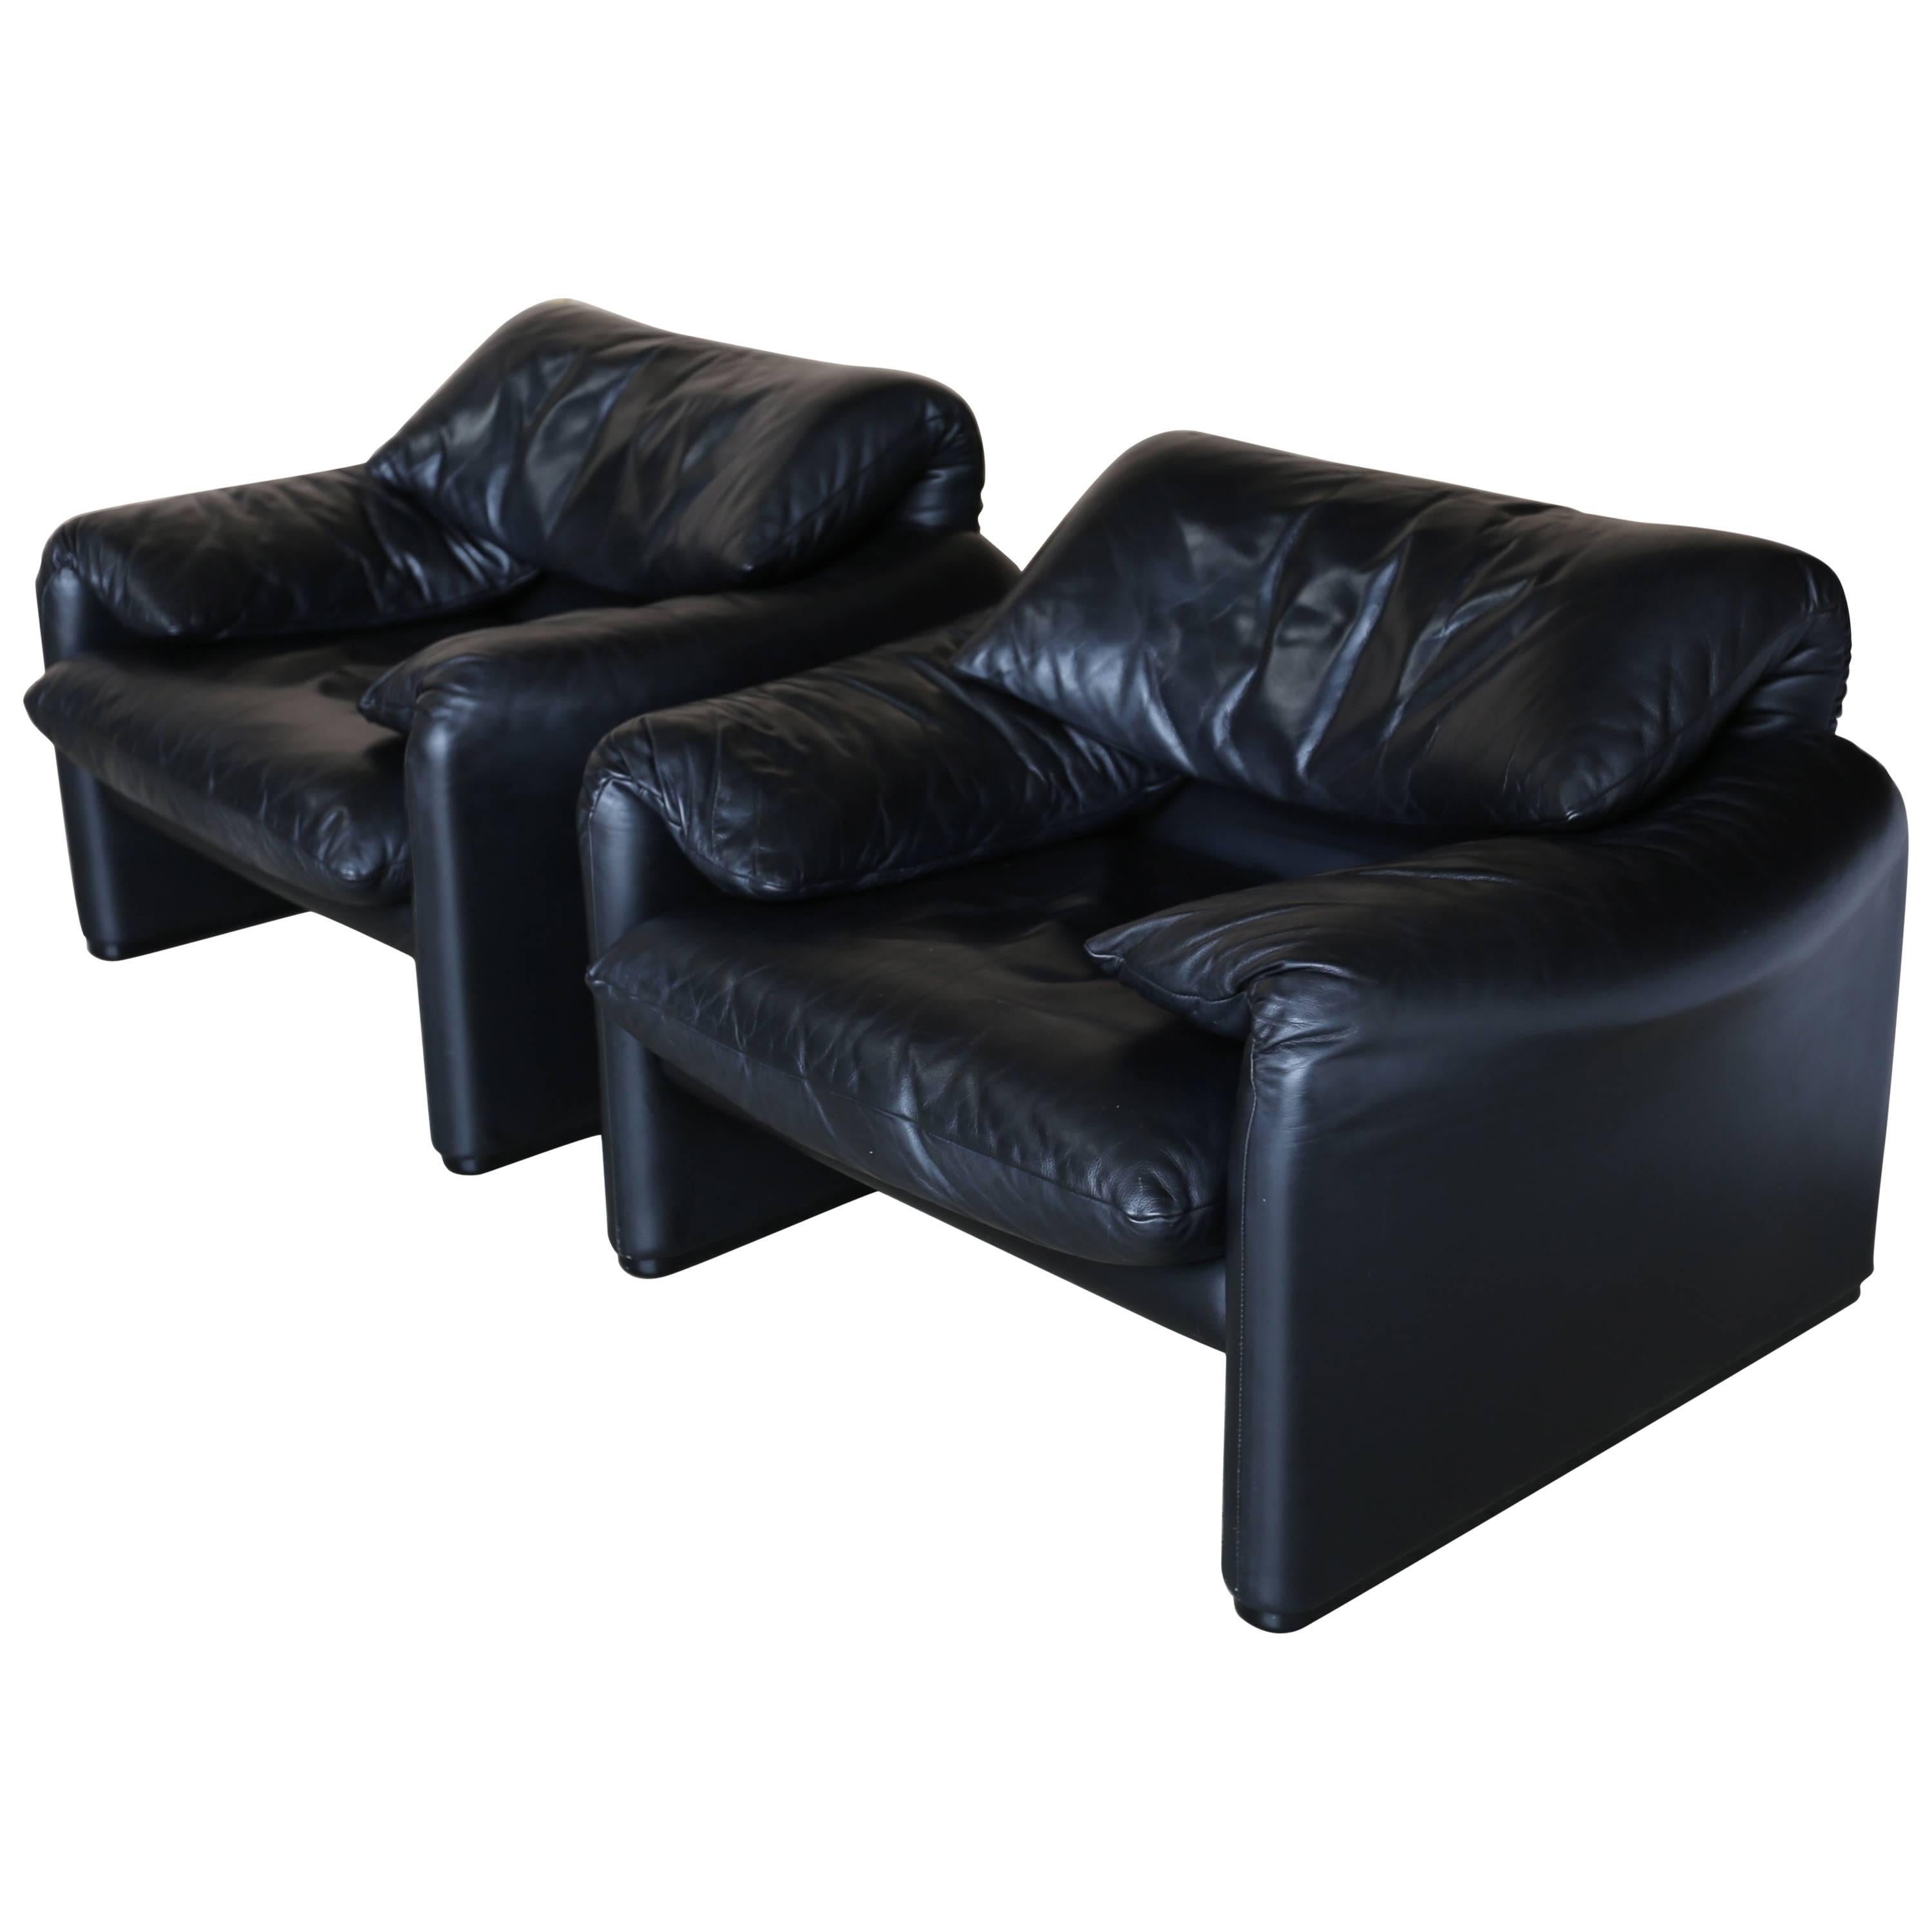 Pair of Black Leather "Maralunga" Lounge Chairs by Vico Magistretti for Cassina